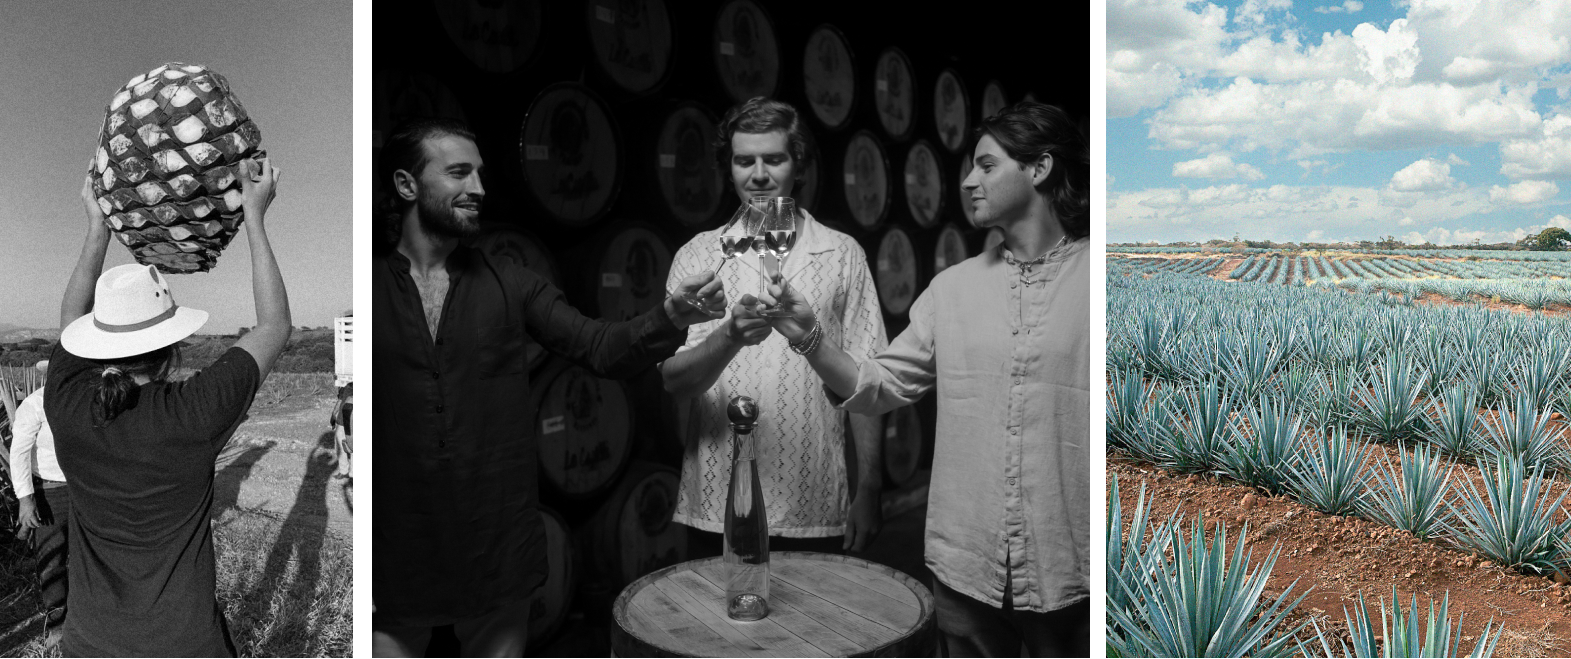 Experts crafting the best luxury tequila at Celosa